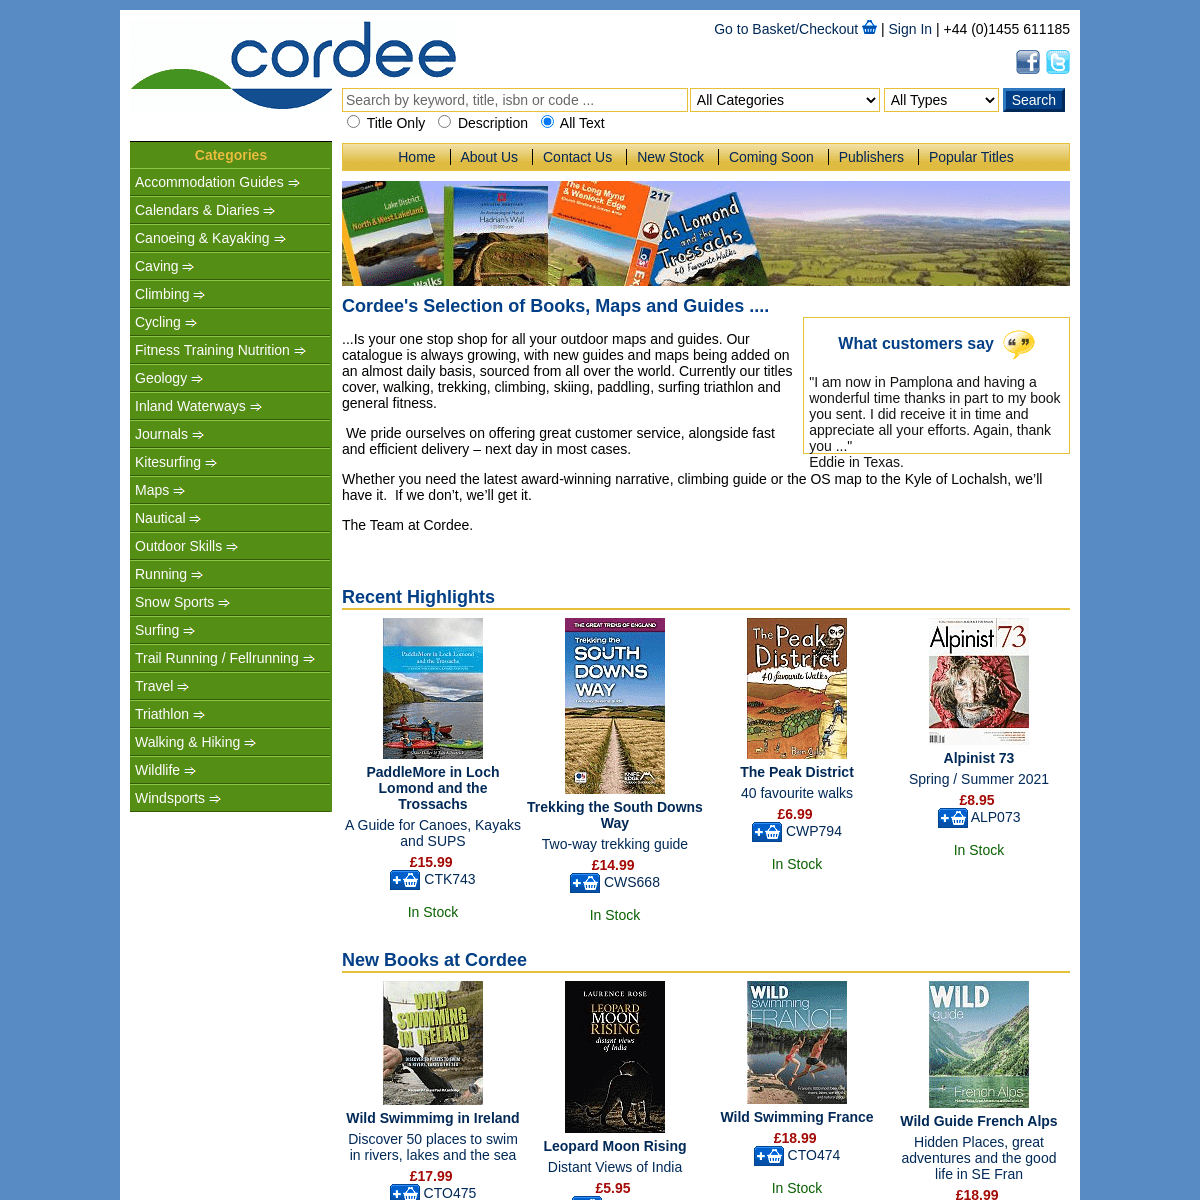 A complete backup of https://cordee.co.uk